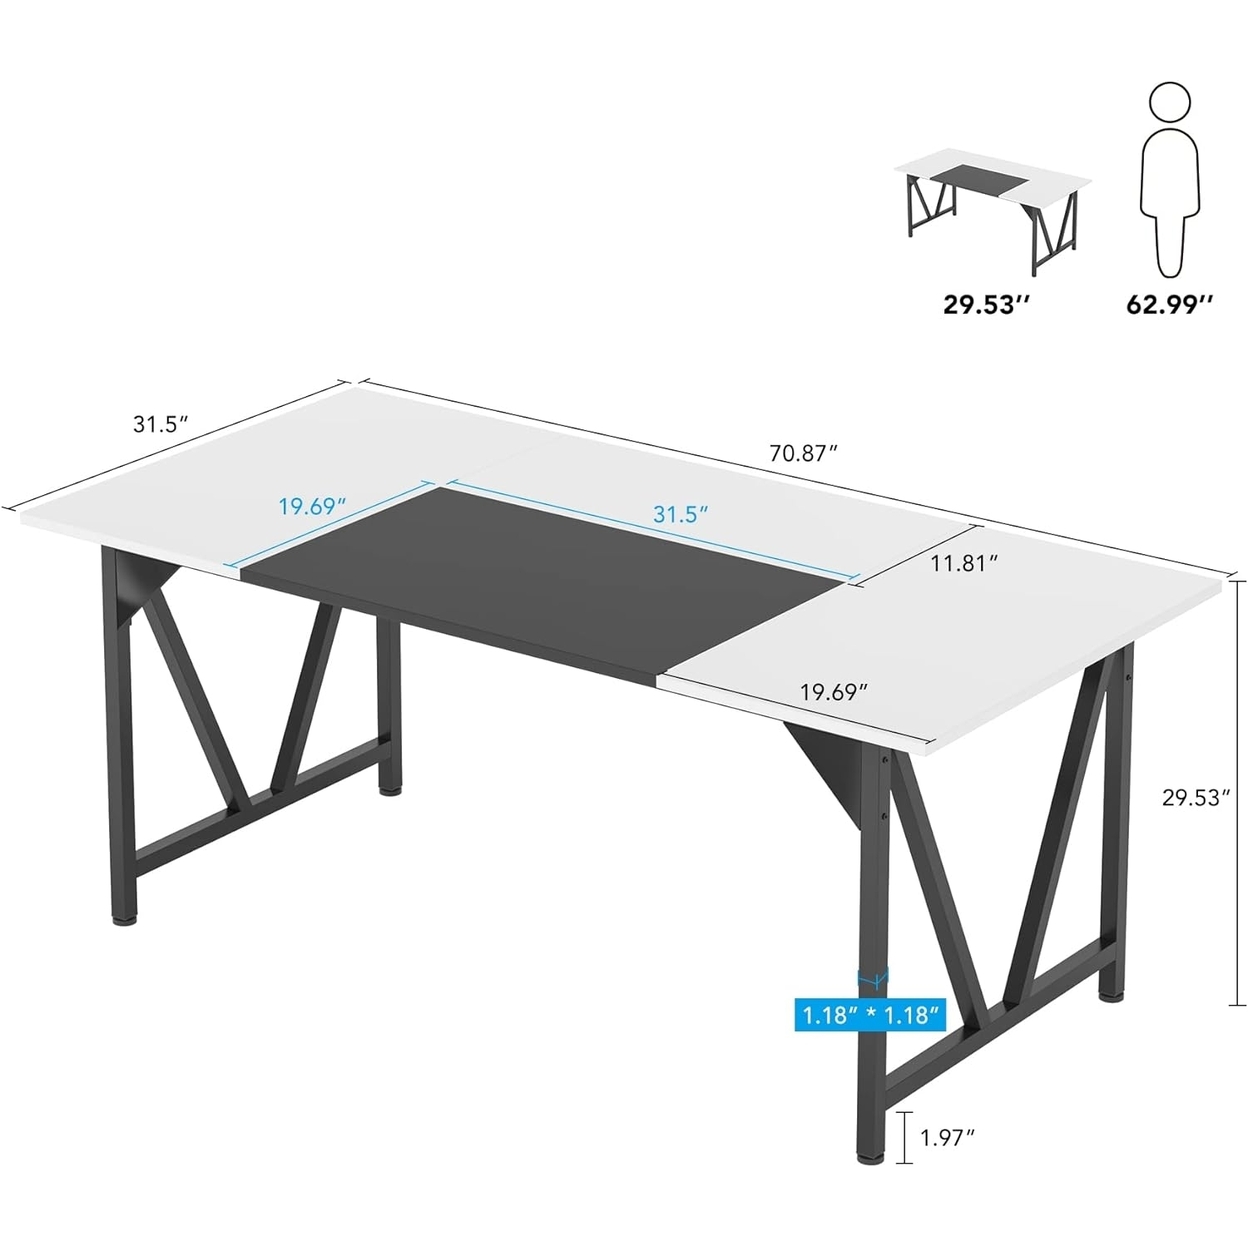 Tribesigns 71 Large Dining Table For 6-8 Peoples, Modern Wood Kitchen Tables With Splicing Board, Rectangle Dining Room Table - Black & Whi